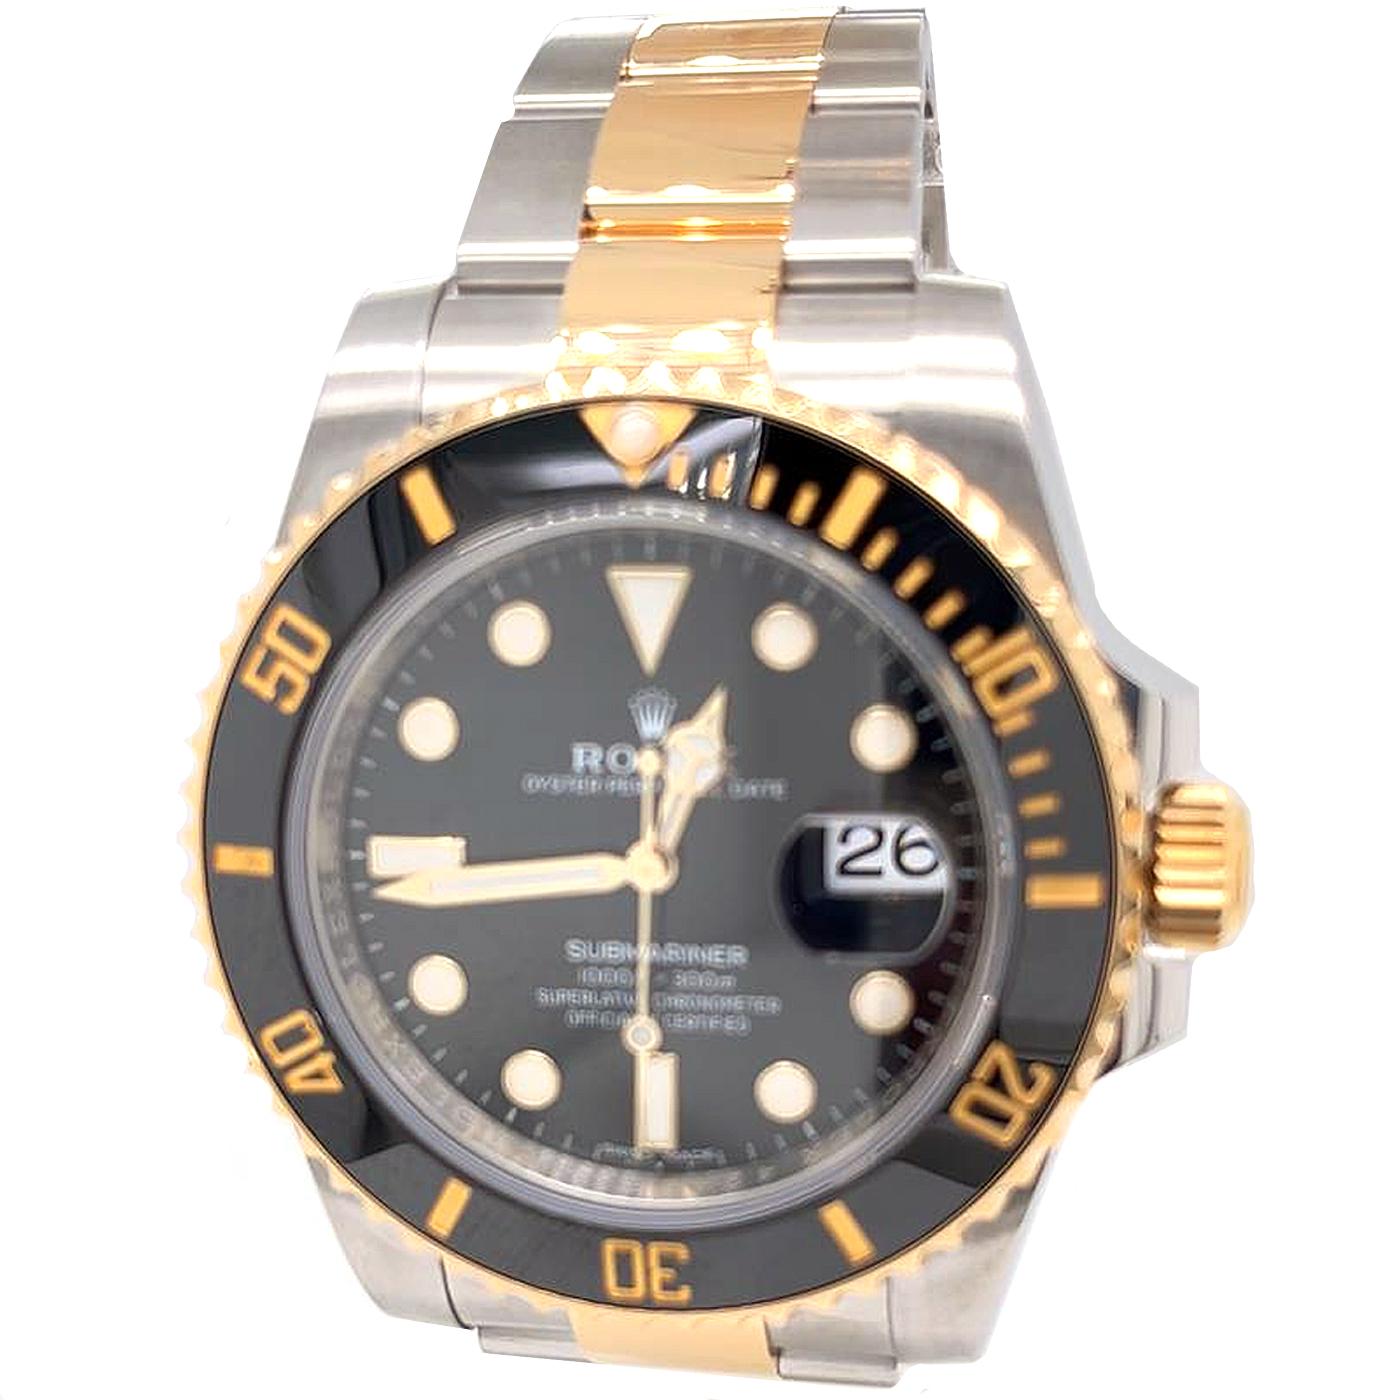 Rolex Submariner Date 116613LN men watch. Features a brushed and polished yellow case and oyster bracelet which is a combination of oyster steel and 18 ct yellow gold. The unidirectional rotating bezel has a black ceramic insert with a 60-minute